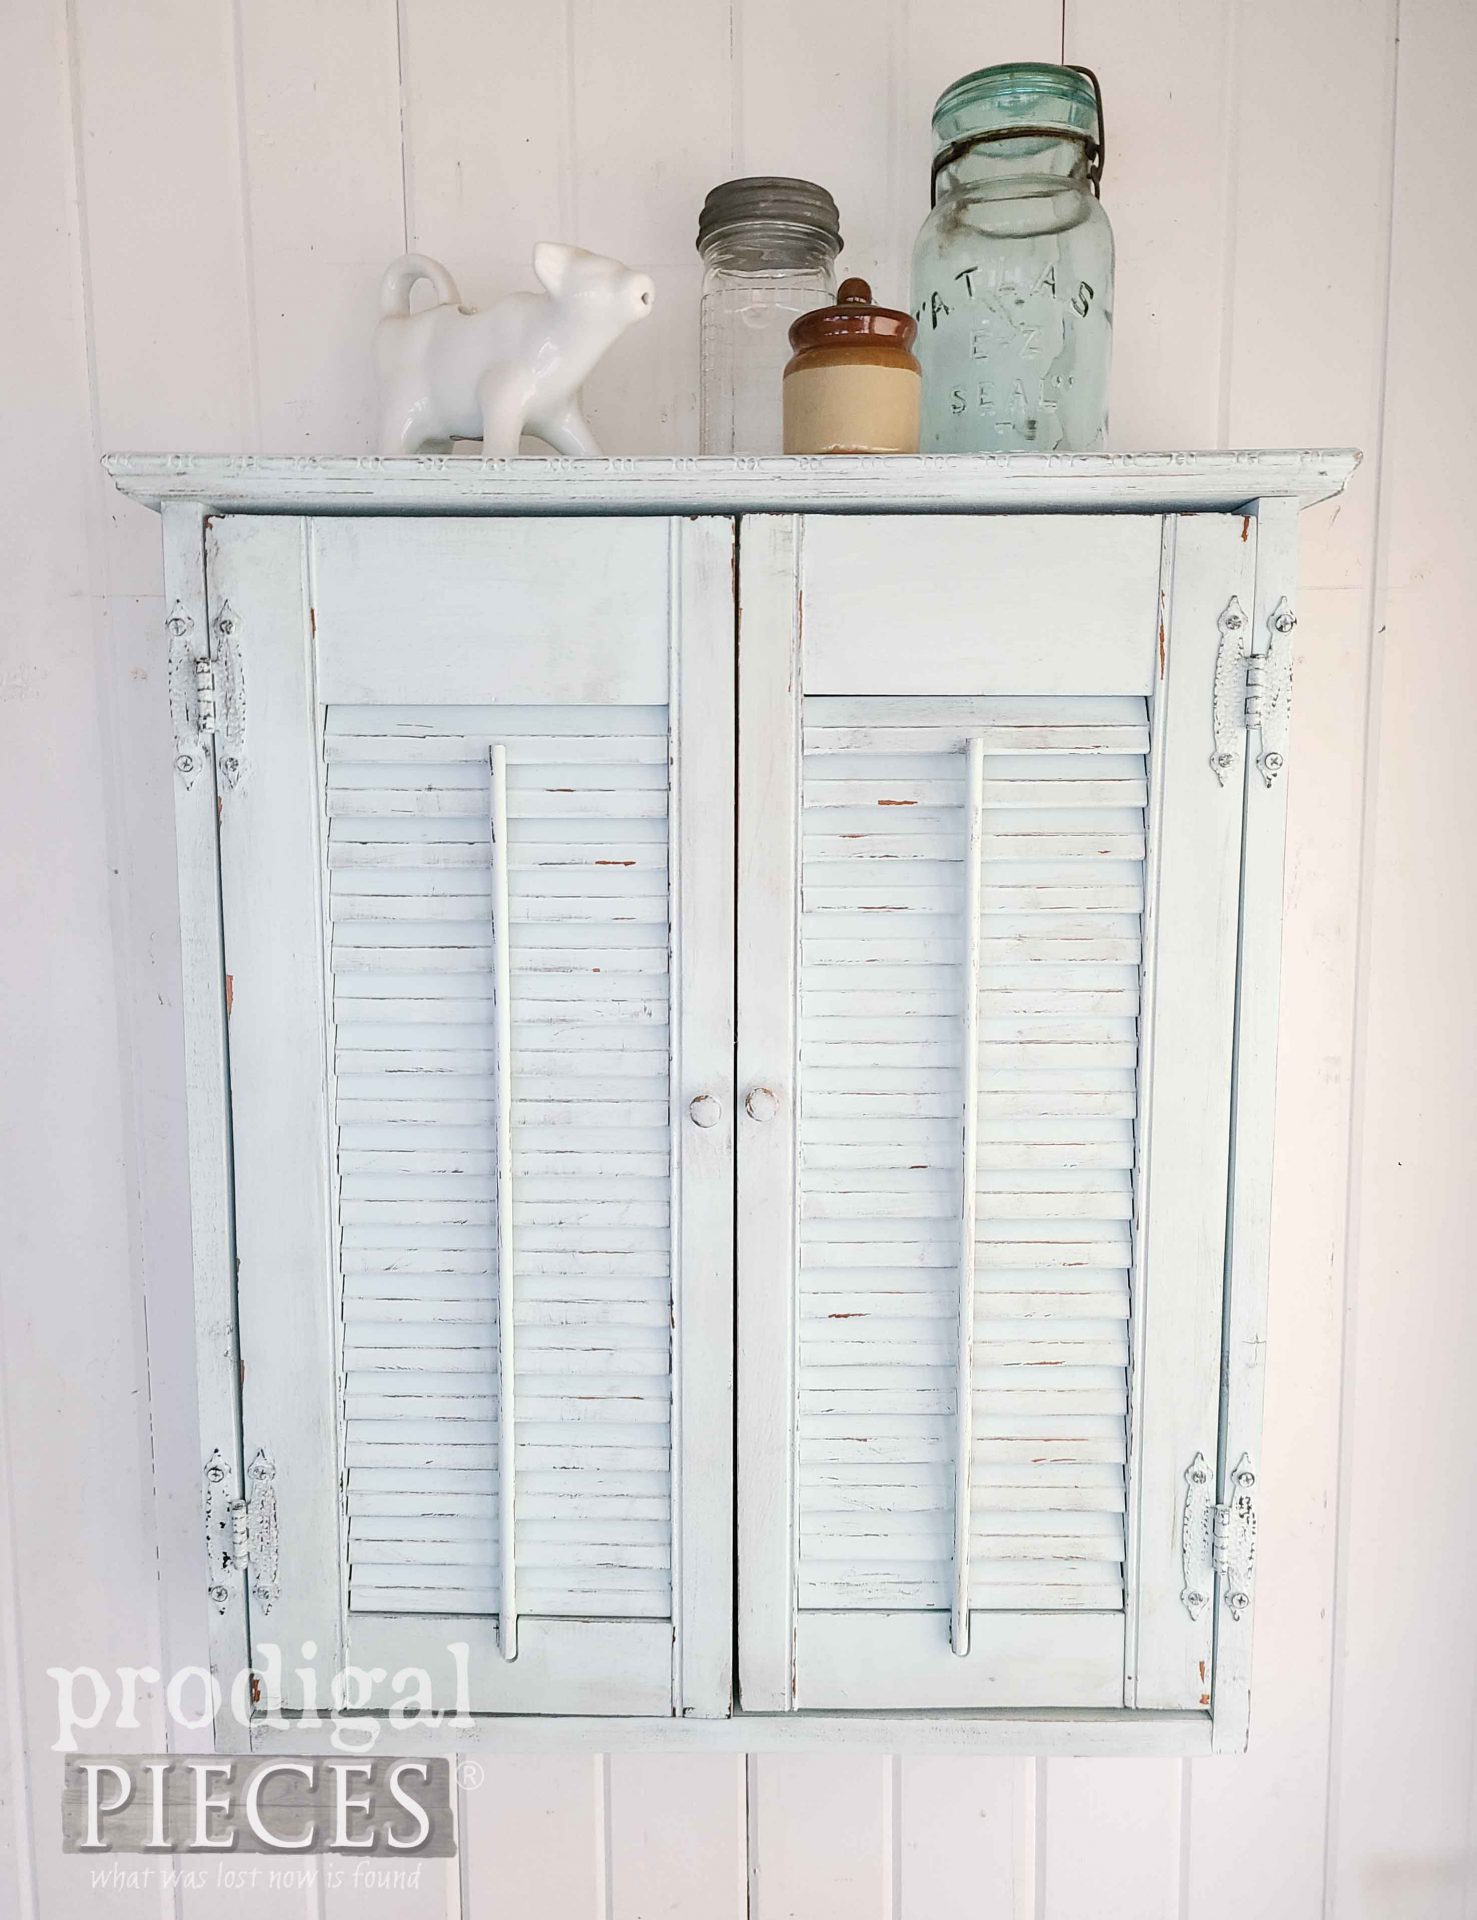 DIY Shutter Wall Cabinet Build by Larissa of Prodigal Pieces | prodigalpieces.com #prodigalpieces #home #diy #woodworking